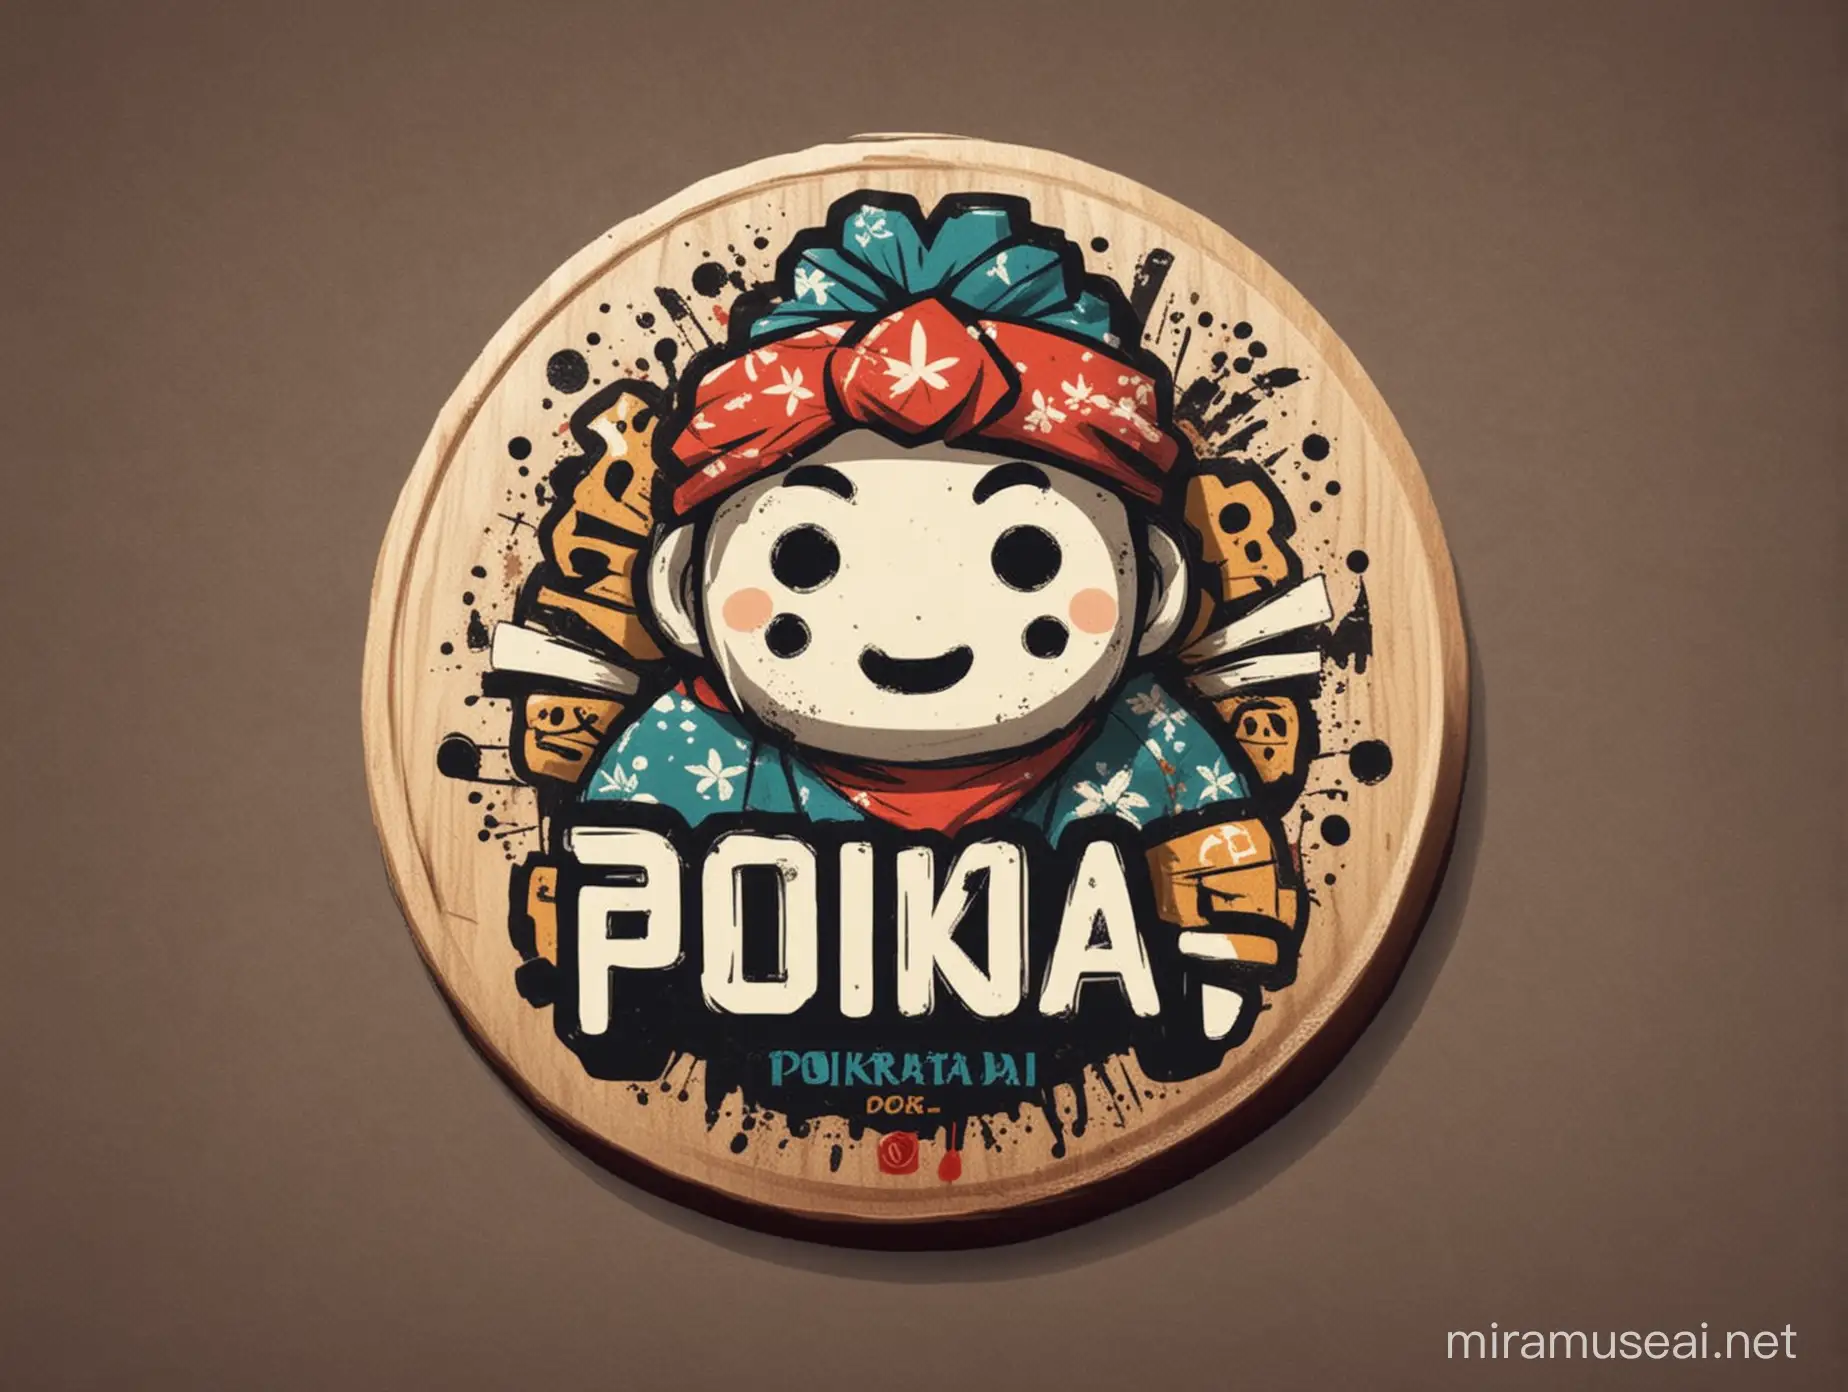 The graphic logo of a company that sells useless items at a very high price. The logo has the inscription "POKUPAI-KA", there are pictographic elements. The main goal is to show on the logo that the company wants to make money, not provide services.